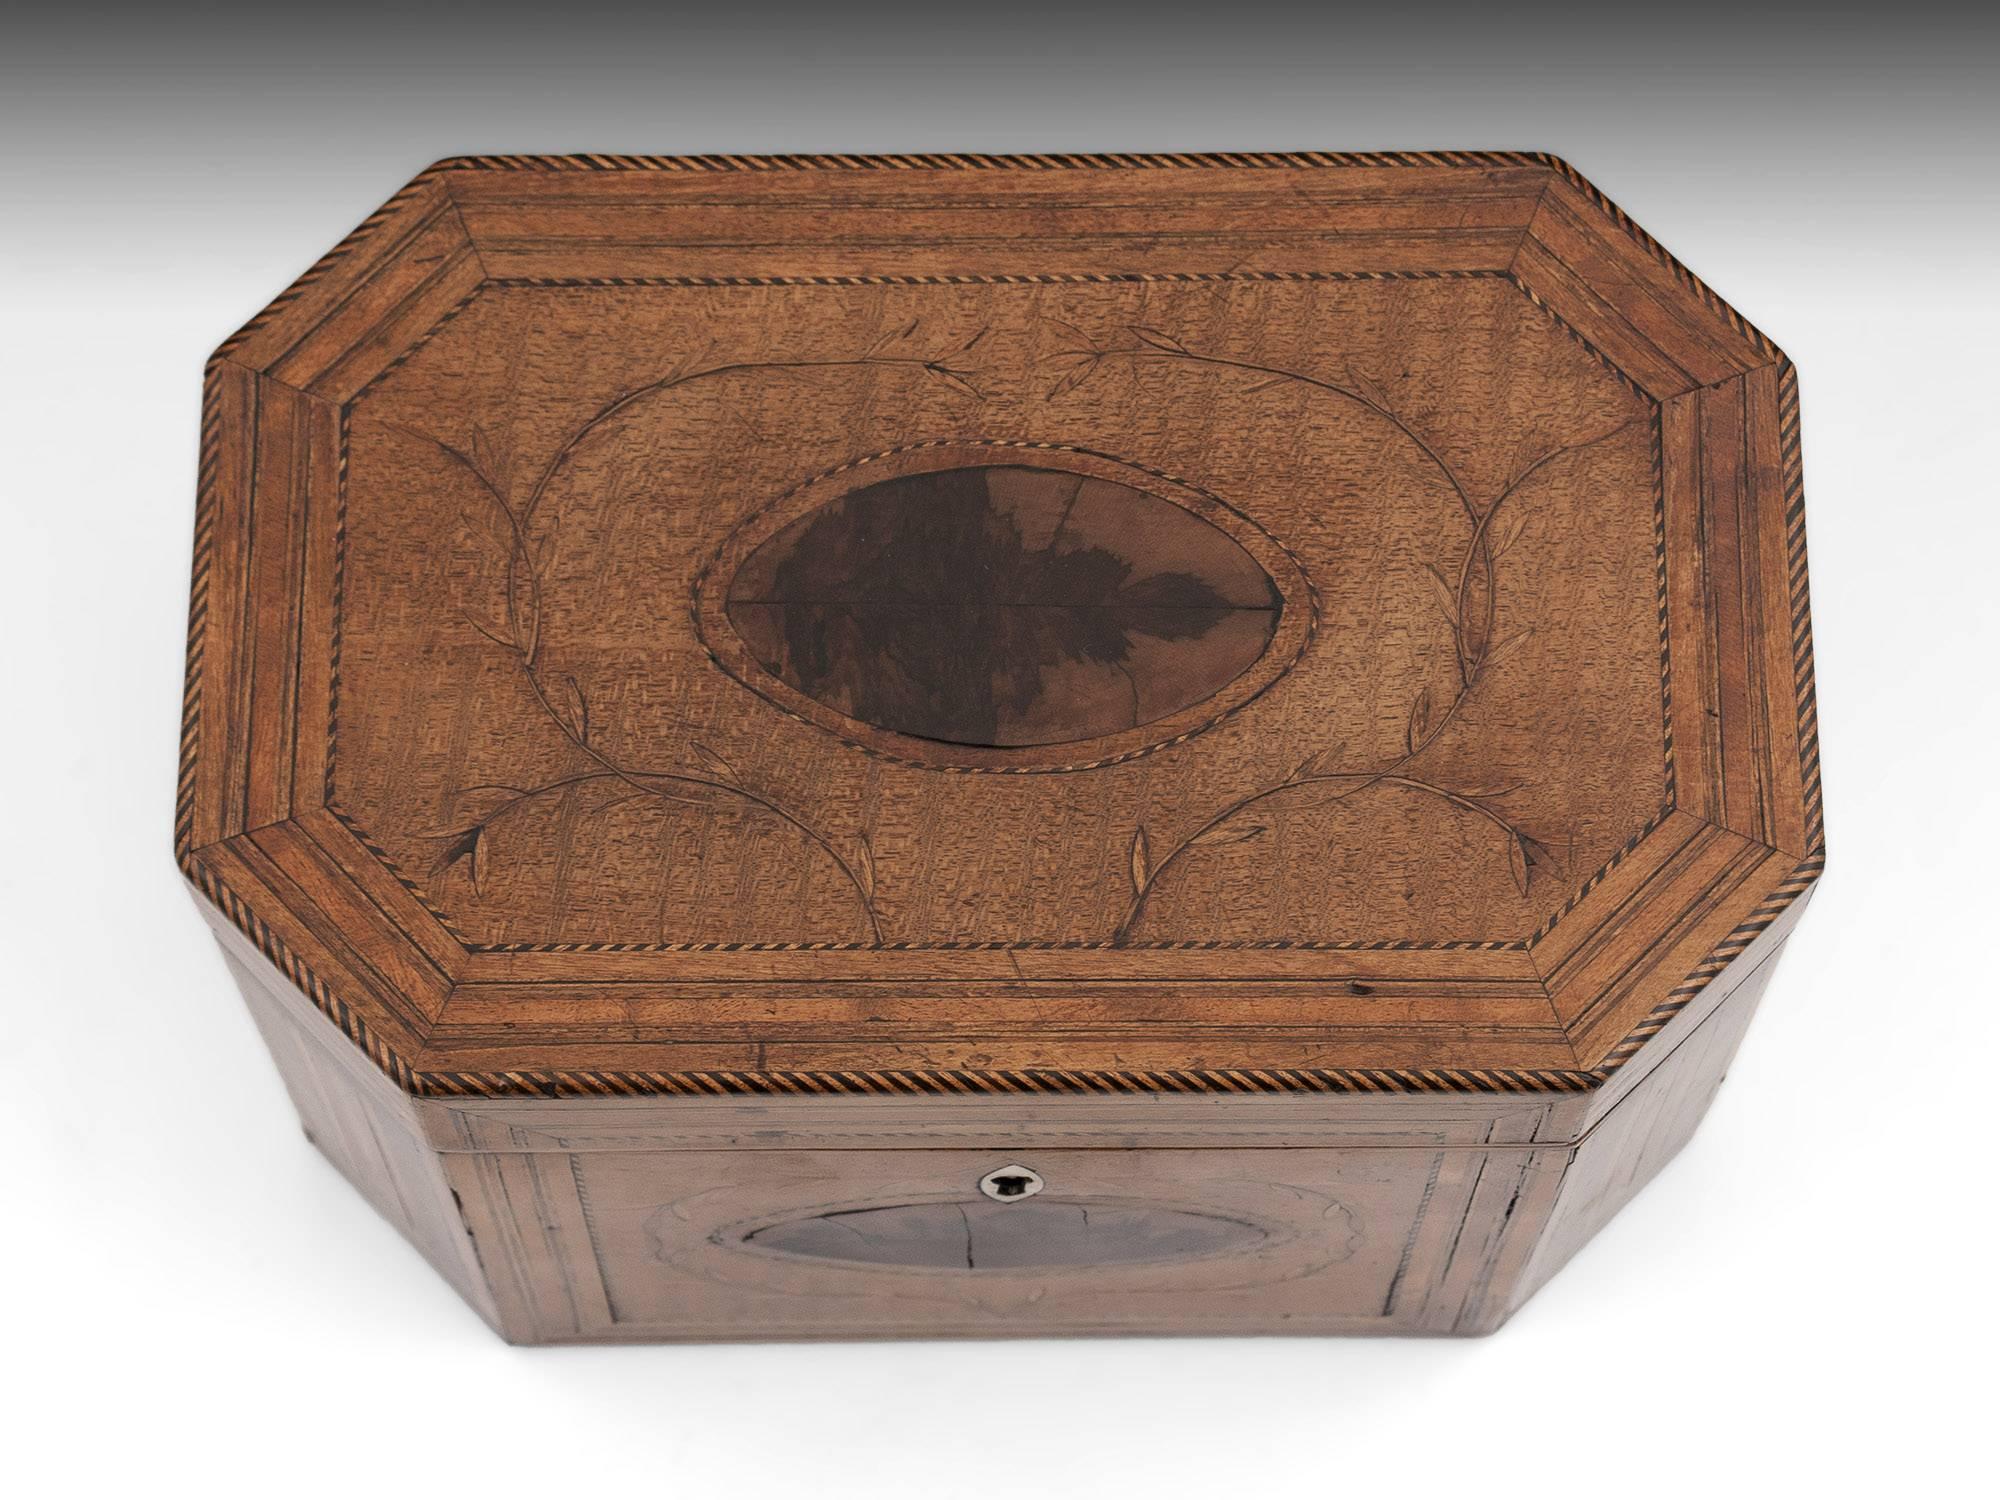 George III Antique Georgian Harewood Tea Caddy with Blackthorn Oysters, 18th Century